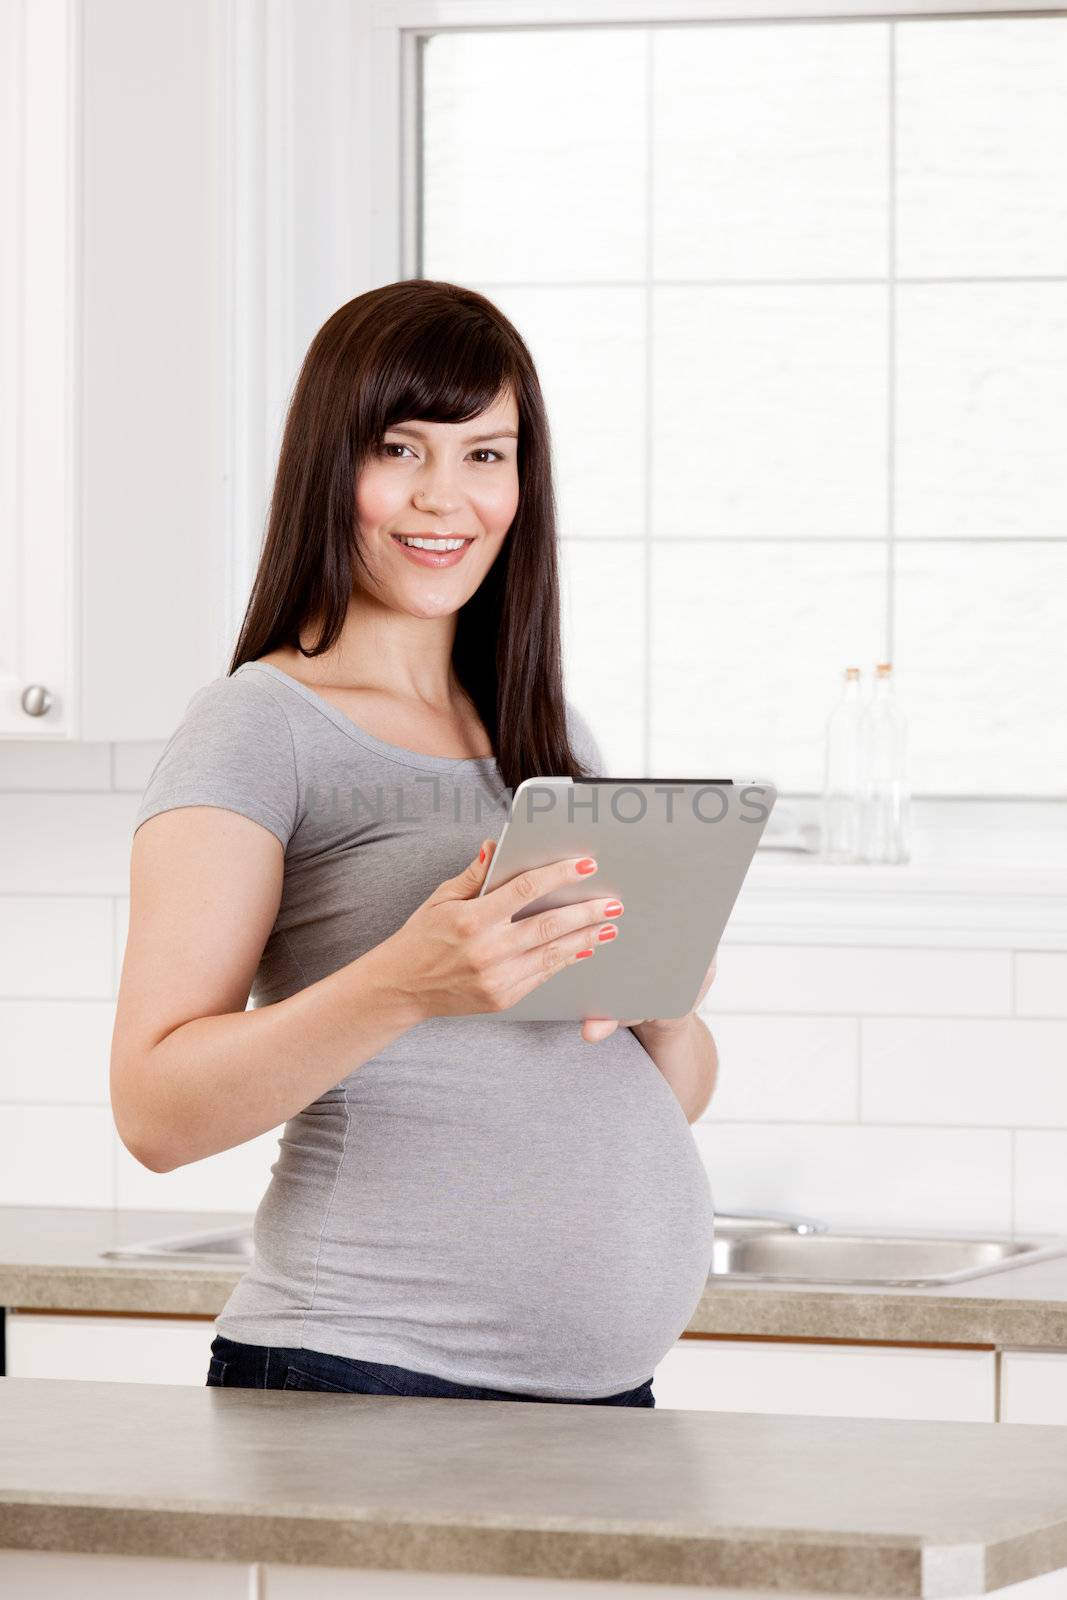 Pregnant Woman with Digital Tablet by leaf